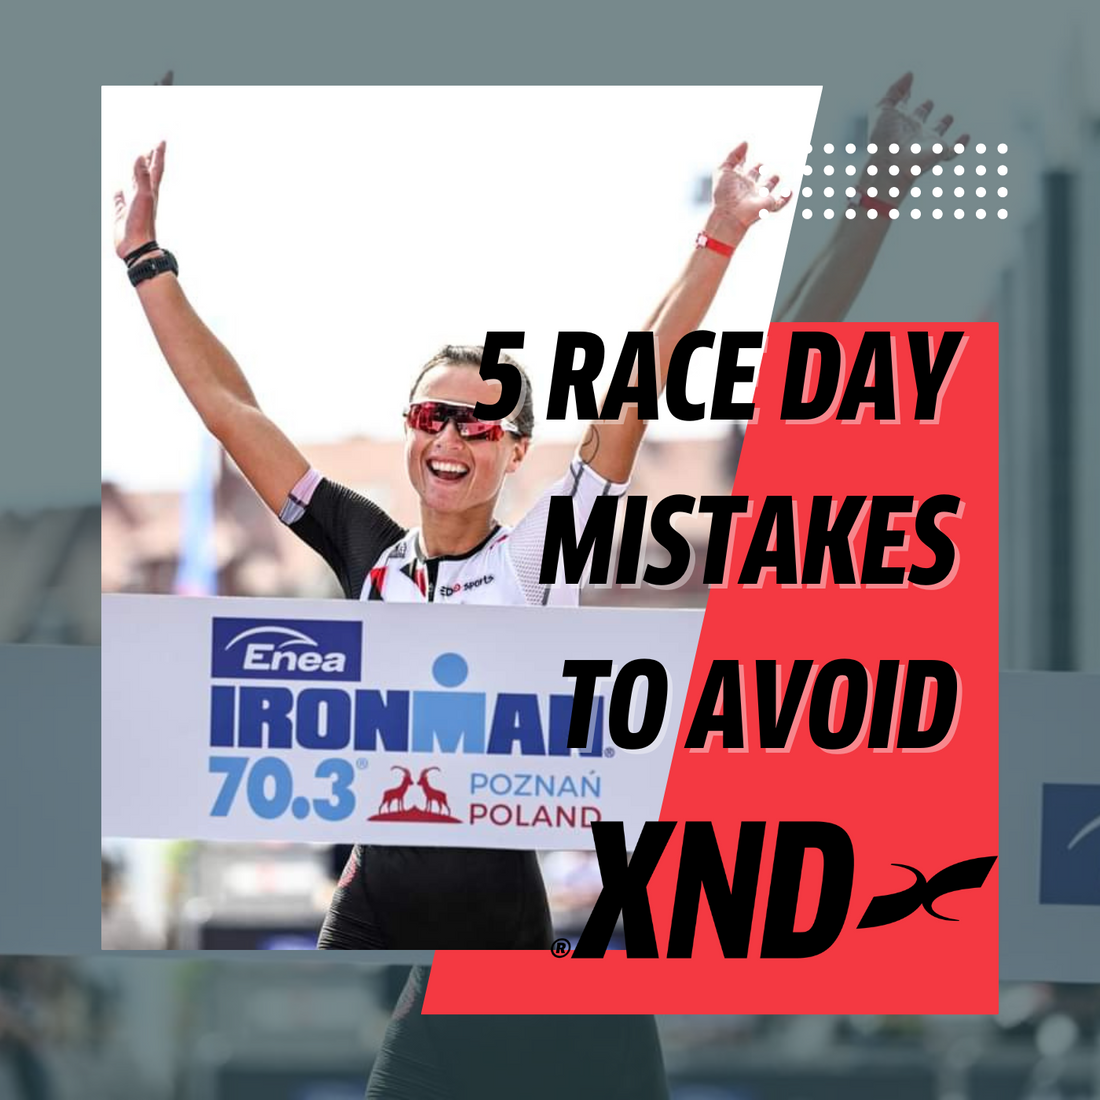 5 Race day mistakes to avoid